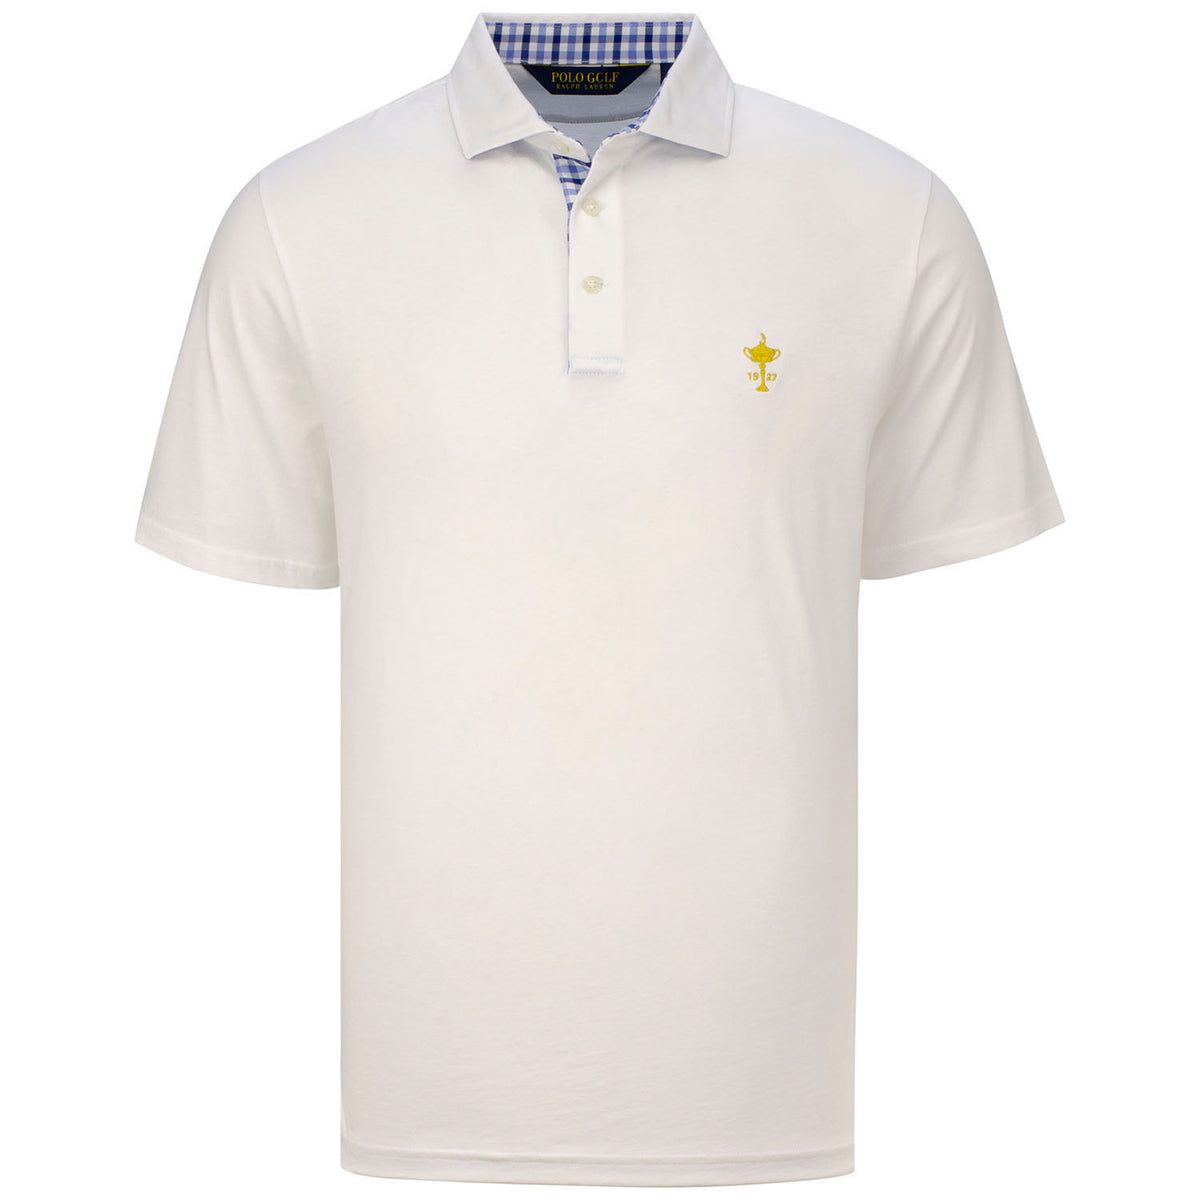 Ryder Cup Ralph Lauren Pima Cotton Polo in White- Front View